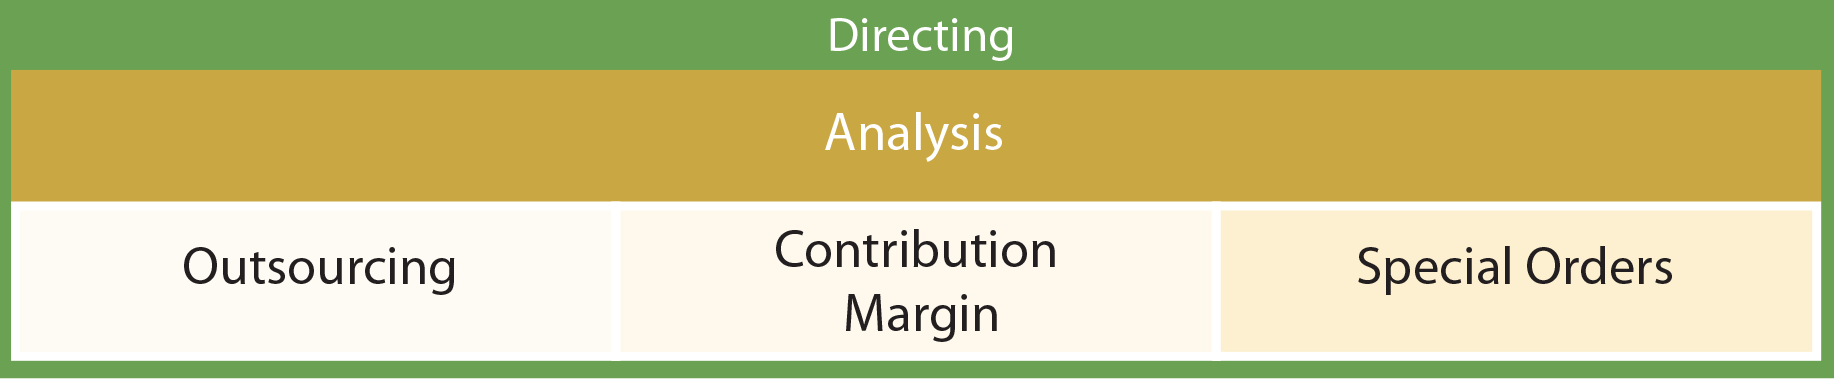 Managerial Accounting Functions - Analysis chart